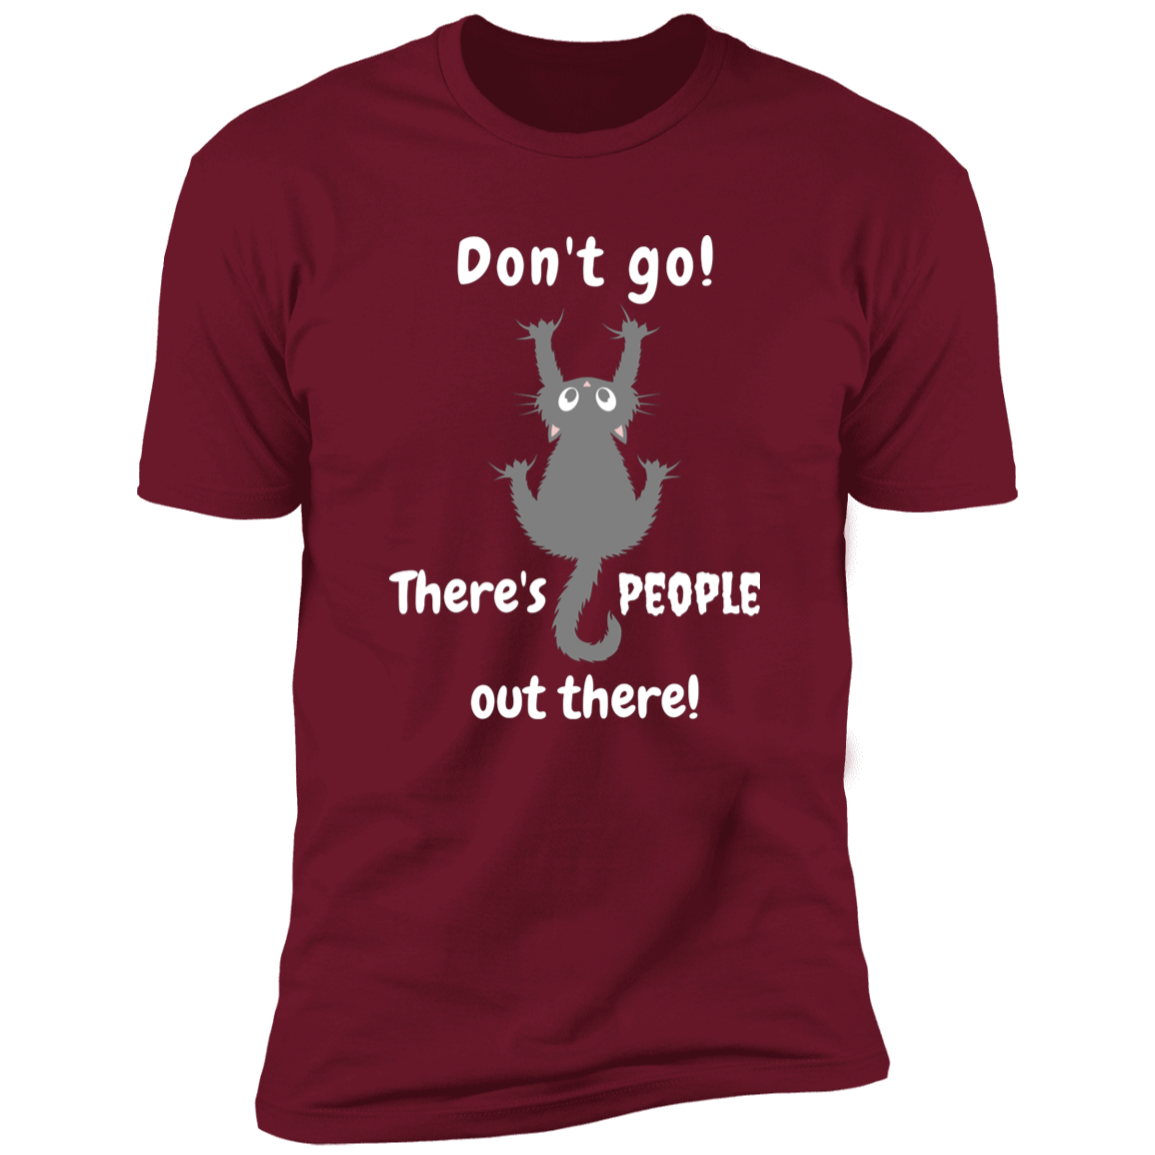 Don't Go! There are People Out there Shirt, funny cat shirt for humans, cat mom and cat dad shirt, in cardinal red